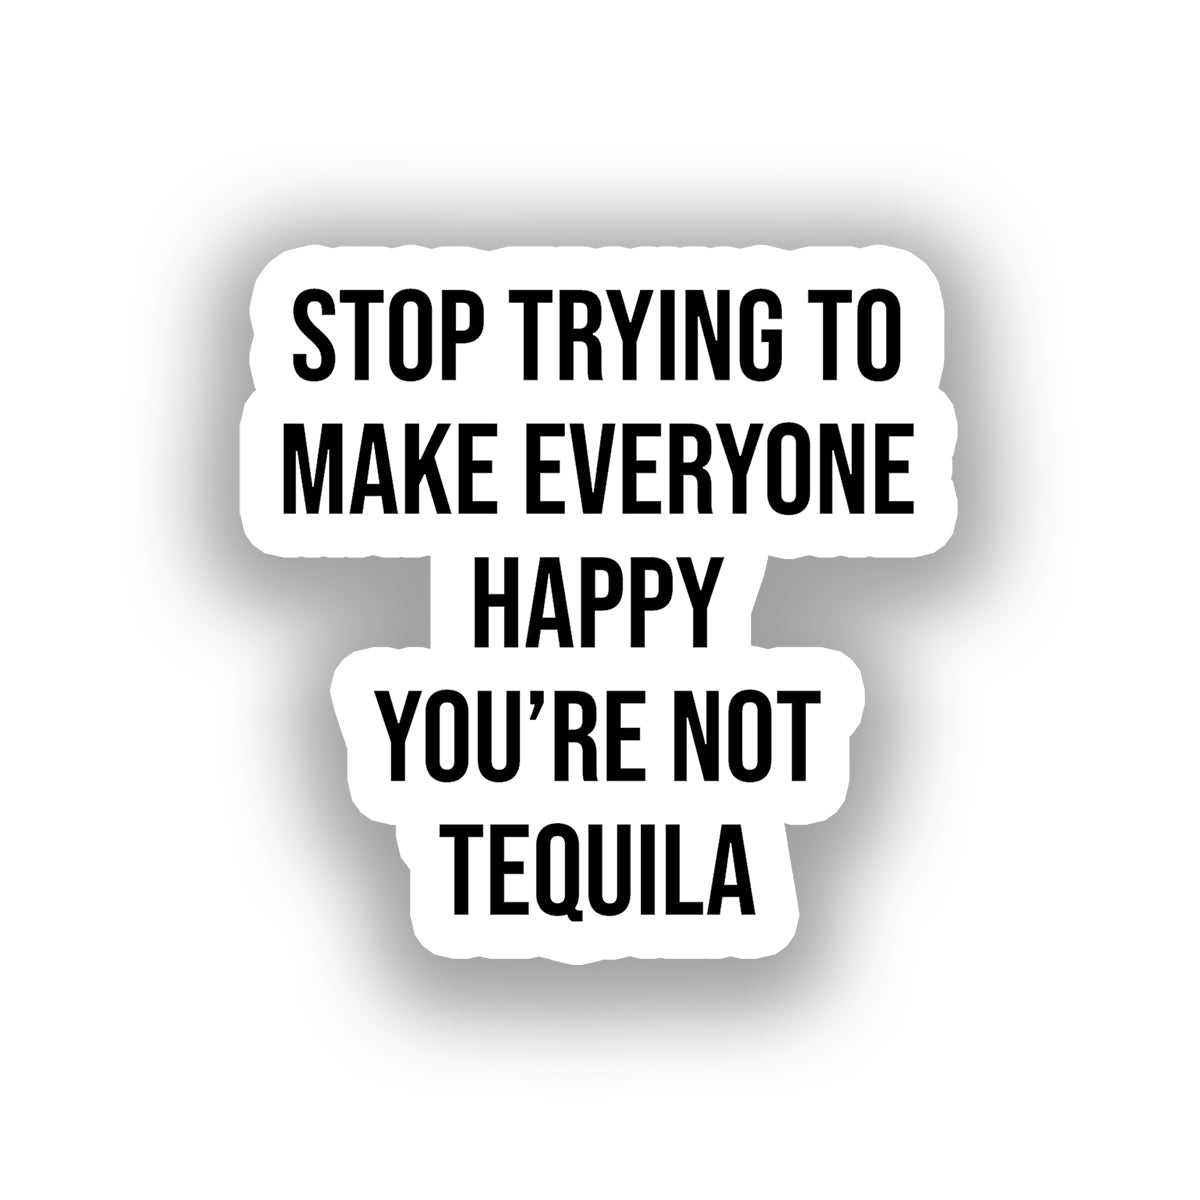 Stop trying to make everyone happy you're not tequila